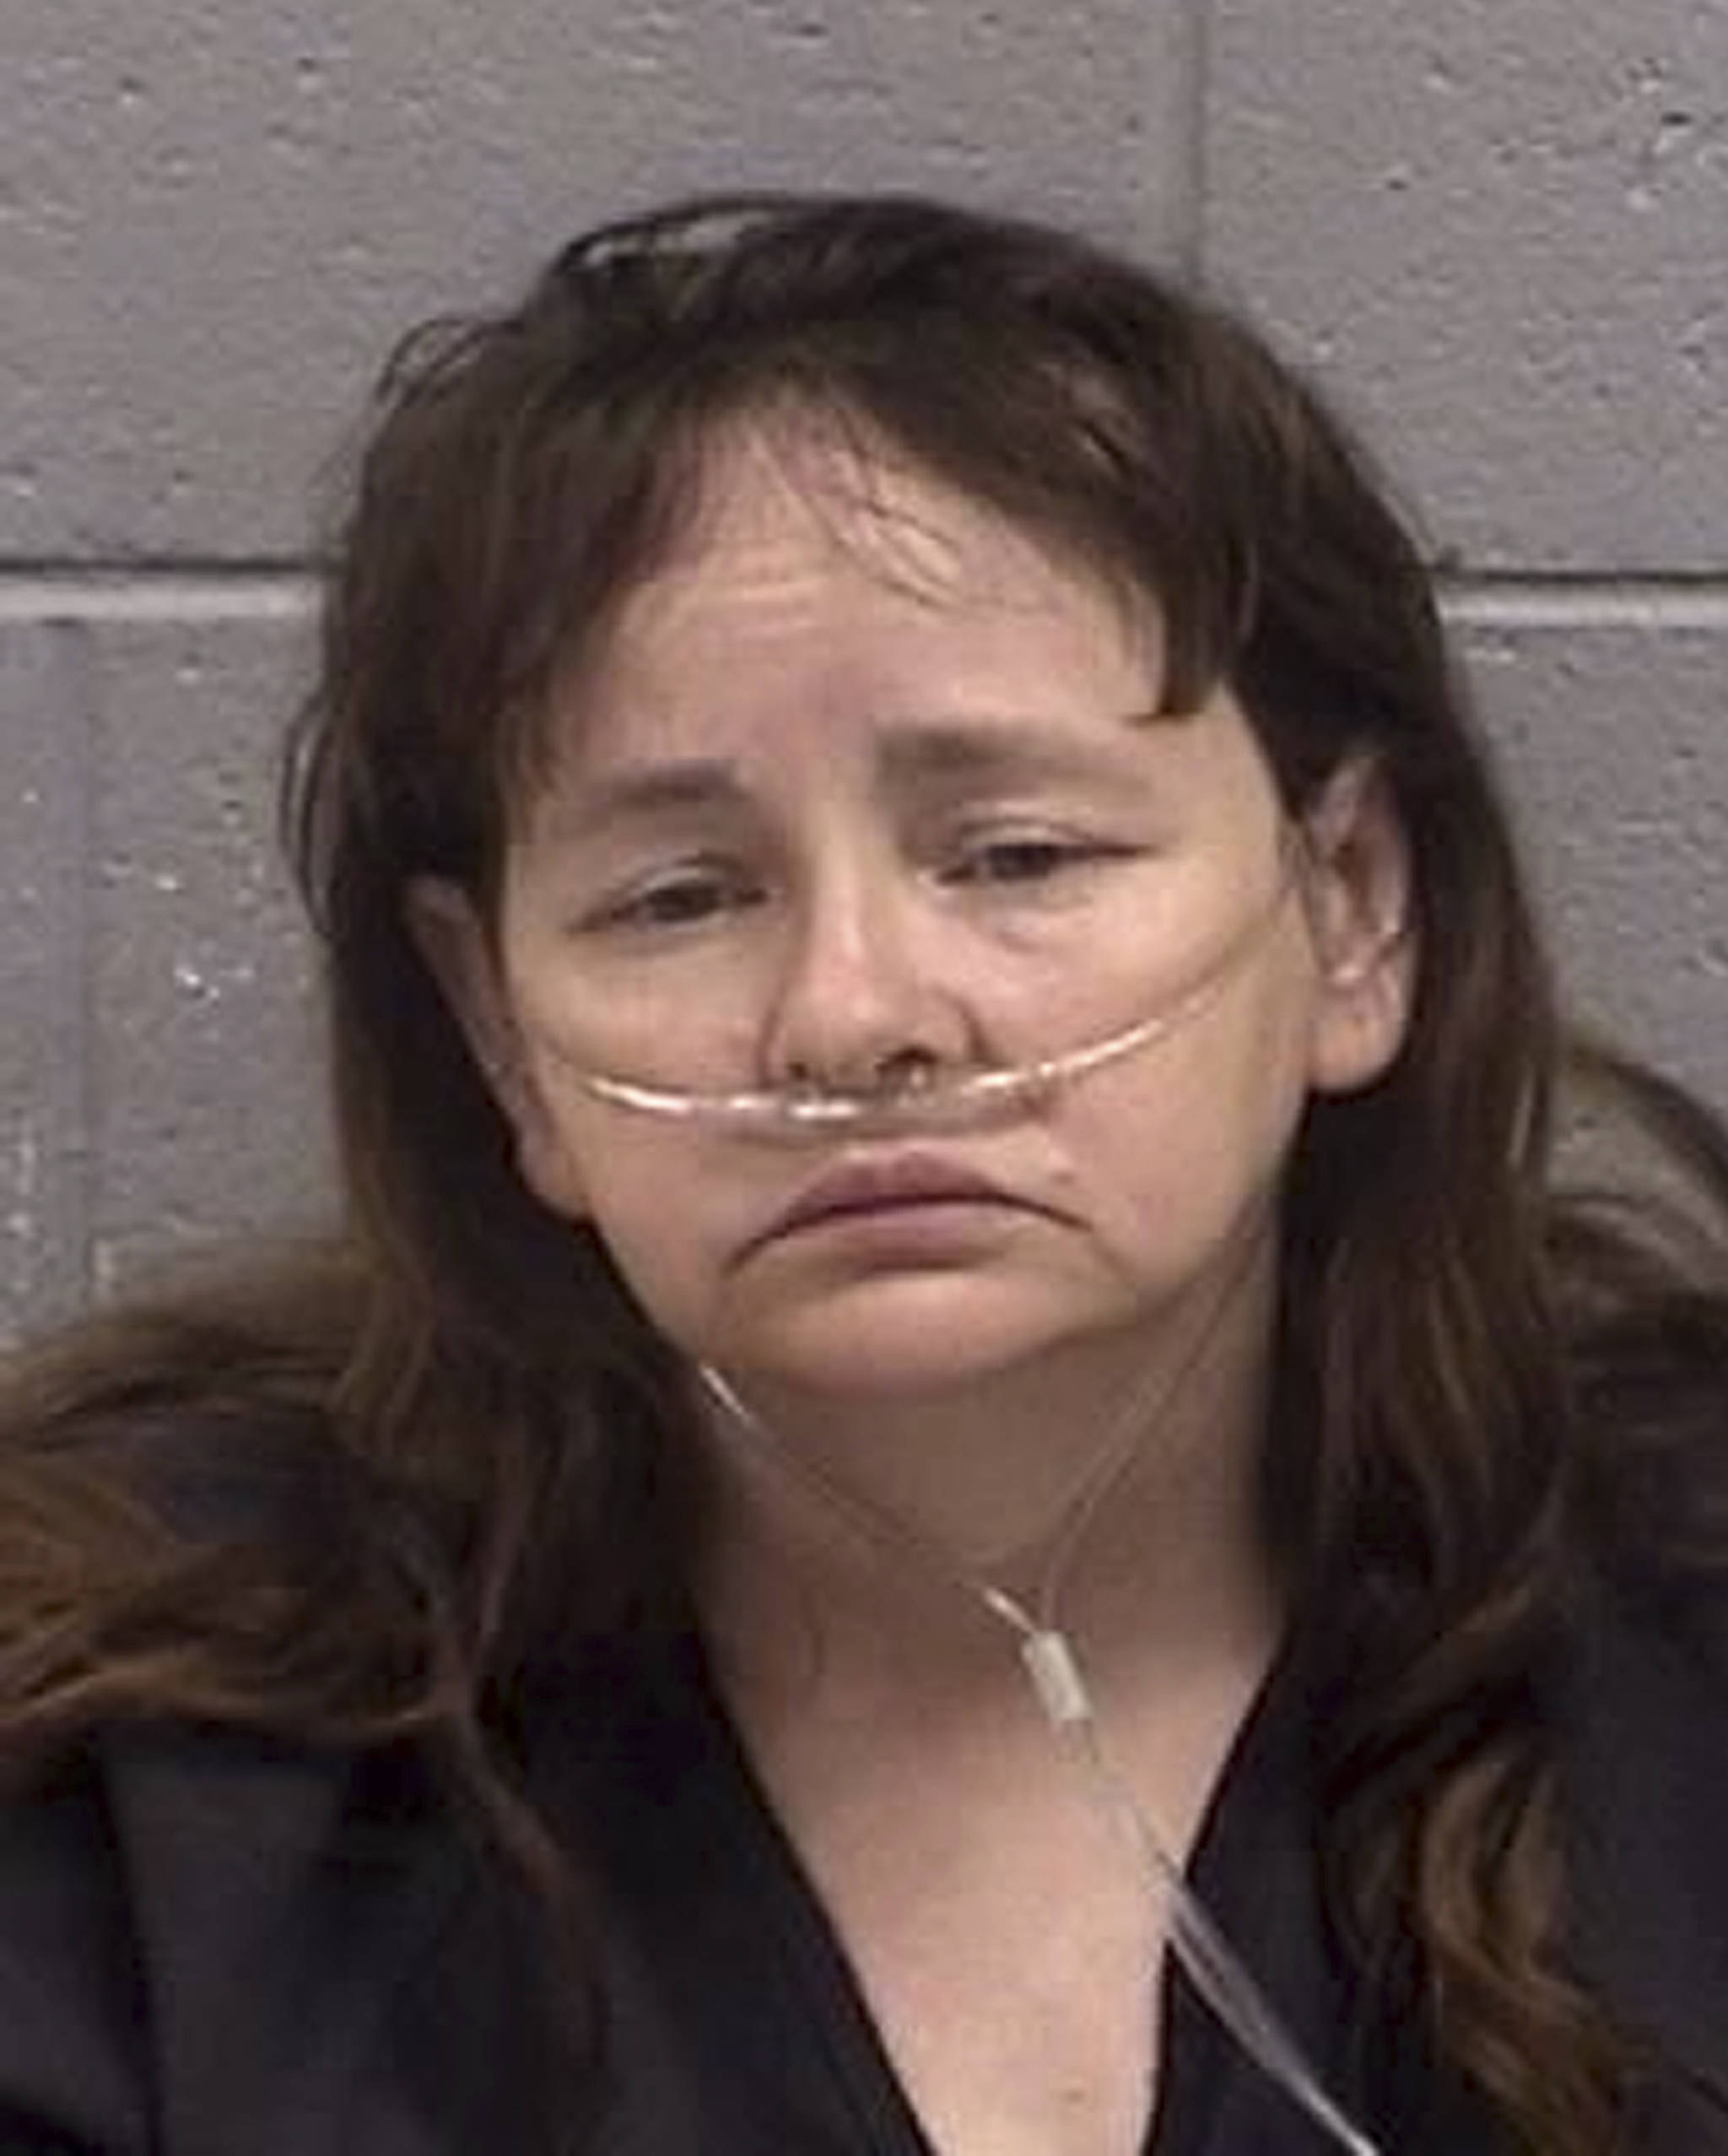 This undated photo released by the San Juan County Sheriff’s Office shows Martha Crouch. The New Mexico woman is facing charges she beat and tortured her children and forced them to watch her kill their pets. Martha and her husband Timothy Crouch of Aztec, N.M., were arrested Monday, June 24, 2019. Court records show they have not been assigned public defenders yet. Documents also say they had prior complaints in Missouri, Alaska, Kansas and Montana. (San Juan County Sheriff’s Office via AP)